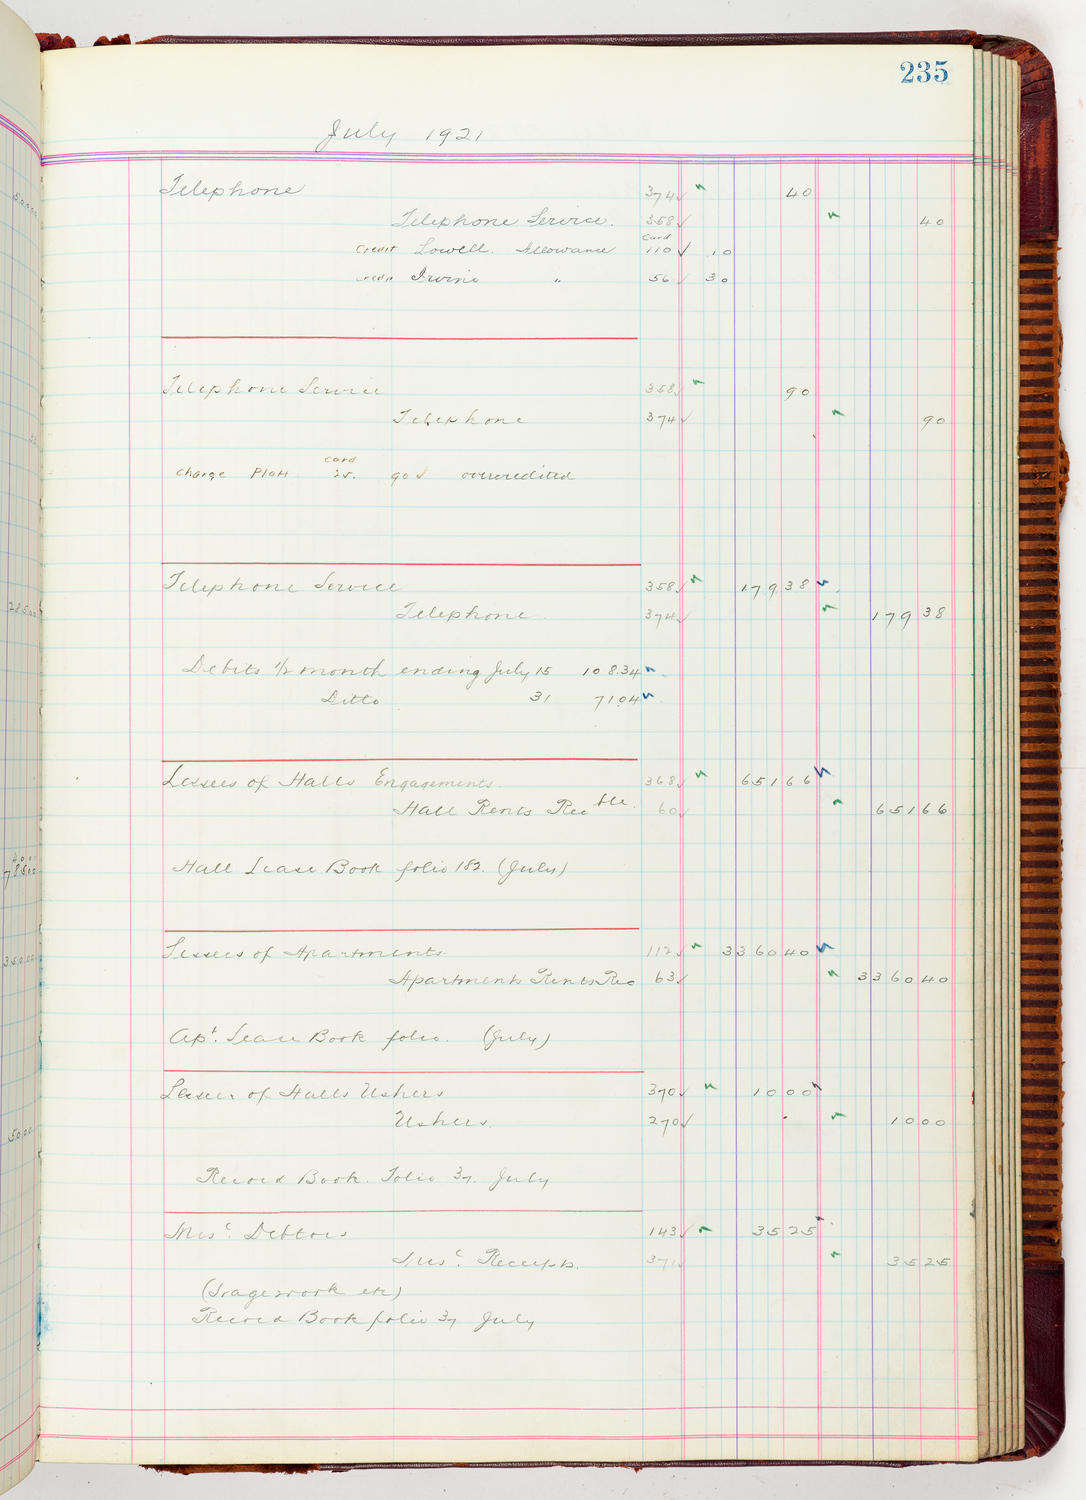 Music Hall Accounting Ledger, volume 5, page 235